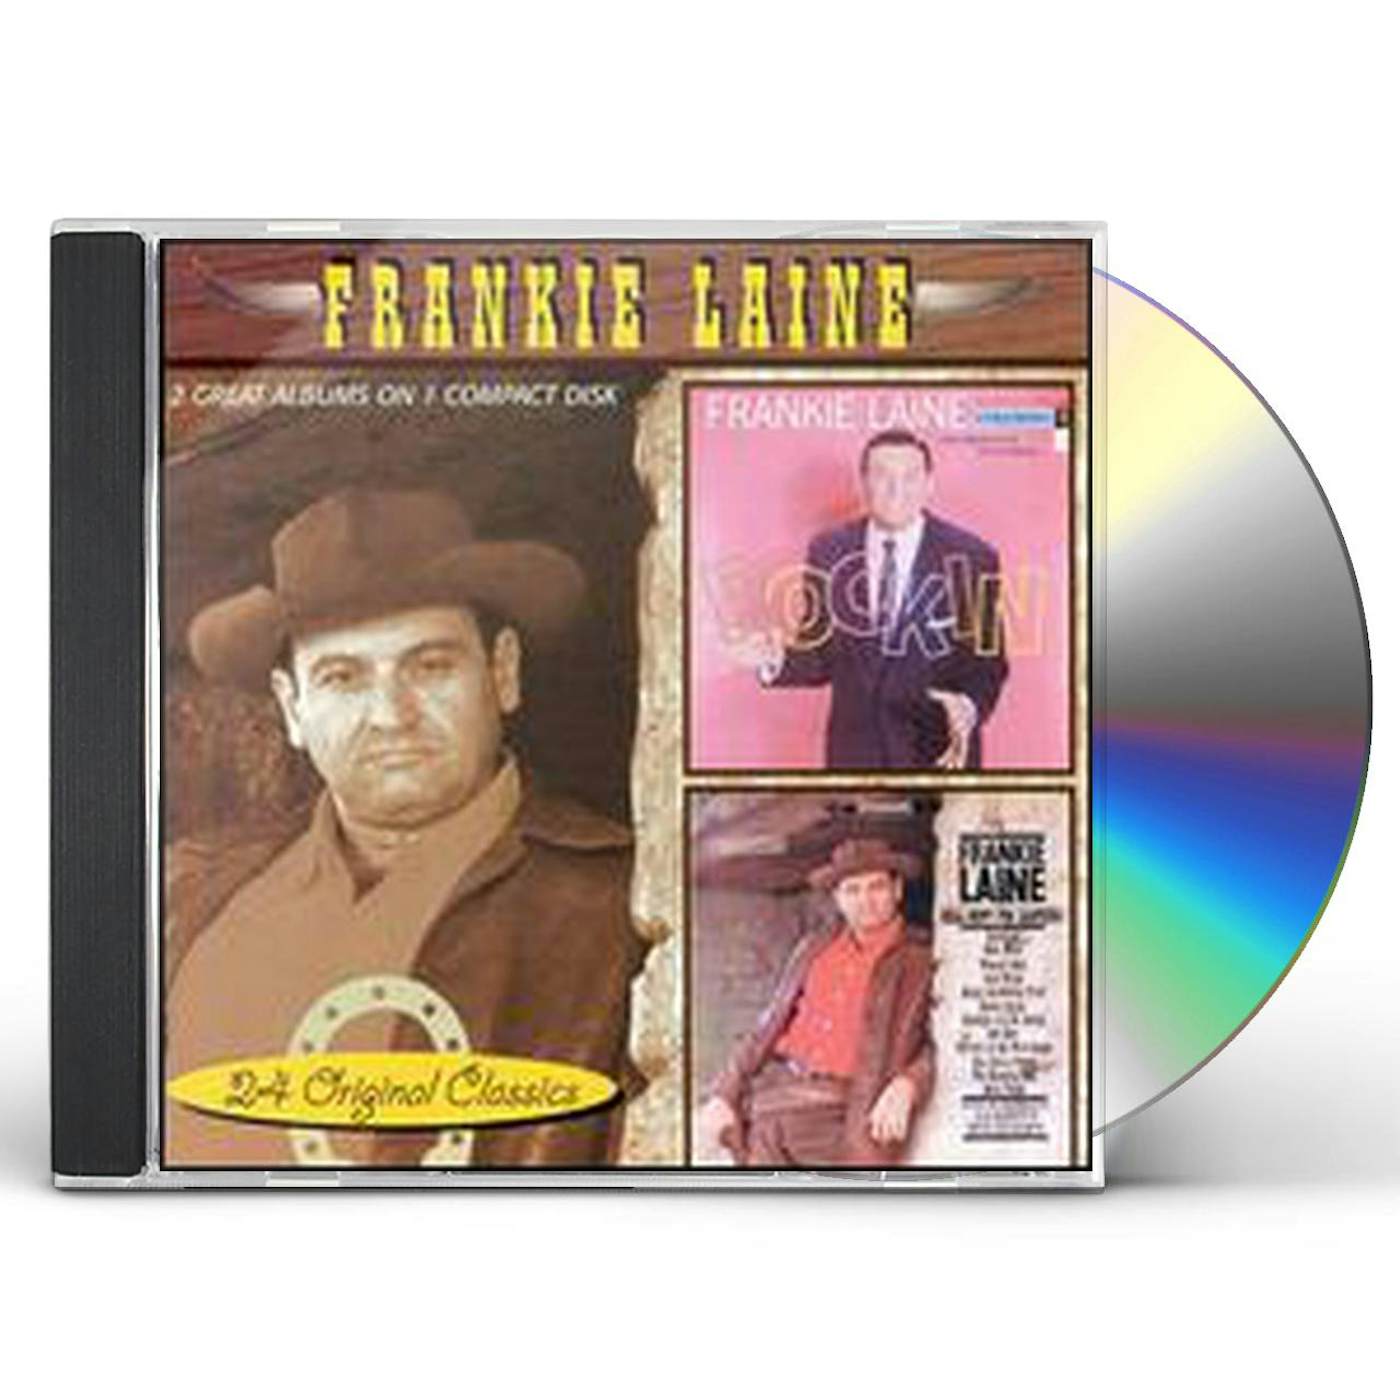 Frankie Laine ROCKIN / HELL BENT FOR LEATHER CD